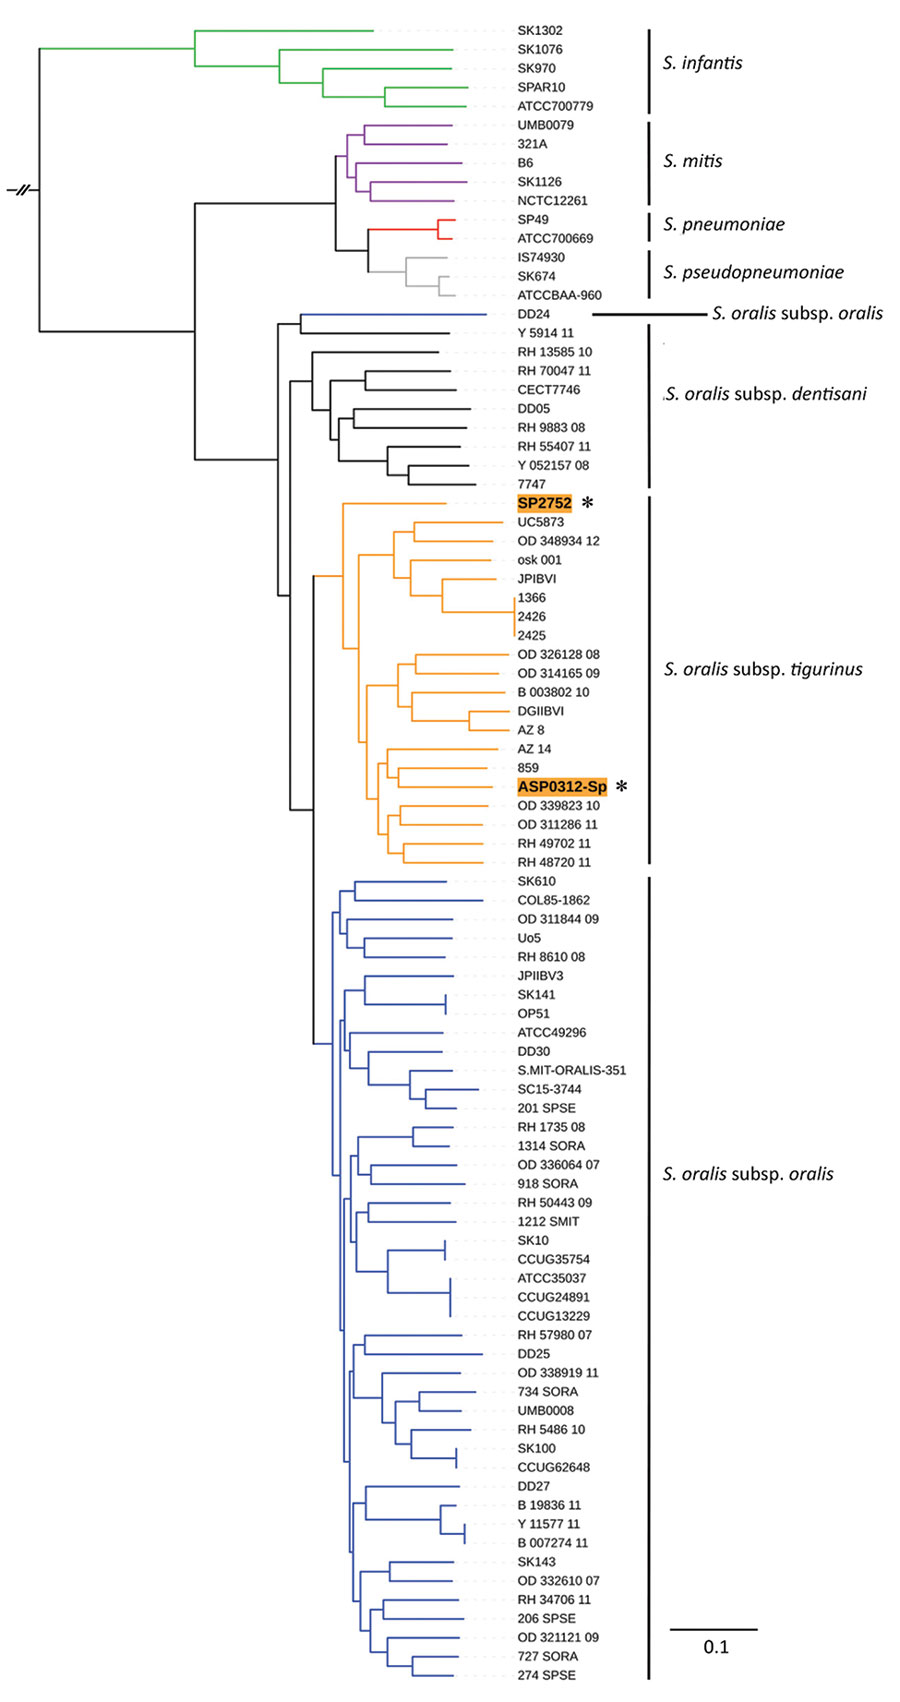 Phylogenetic analysis of invasive Streptococcus oralis expressing serotype 3 pneumococcal capsule from 2 adult patients, Japan. Asterisks and orange shading indicate genomes from isolates ASP0312-Sp and SP2752 identified in this study. Homologous core gene clusters of 71 strains from 3 Streptococcus oralis subsp., 2 S. pneumoniae, 5 S. mitis, 5 S. infantis, and 3 S. pseudopneumoniae were downloaded from the National Center for Biotechnology Information database (https://www.ncbi.nlm.nih.gov) and compared with the ASP0312-Sp and SP2752 genomes. Branch lengths represent the genetic distance. Scale bar indicates nucleotide substitutions per site.